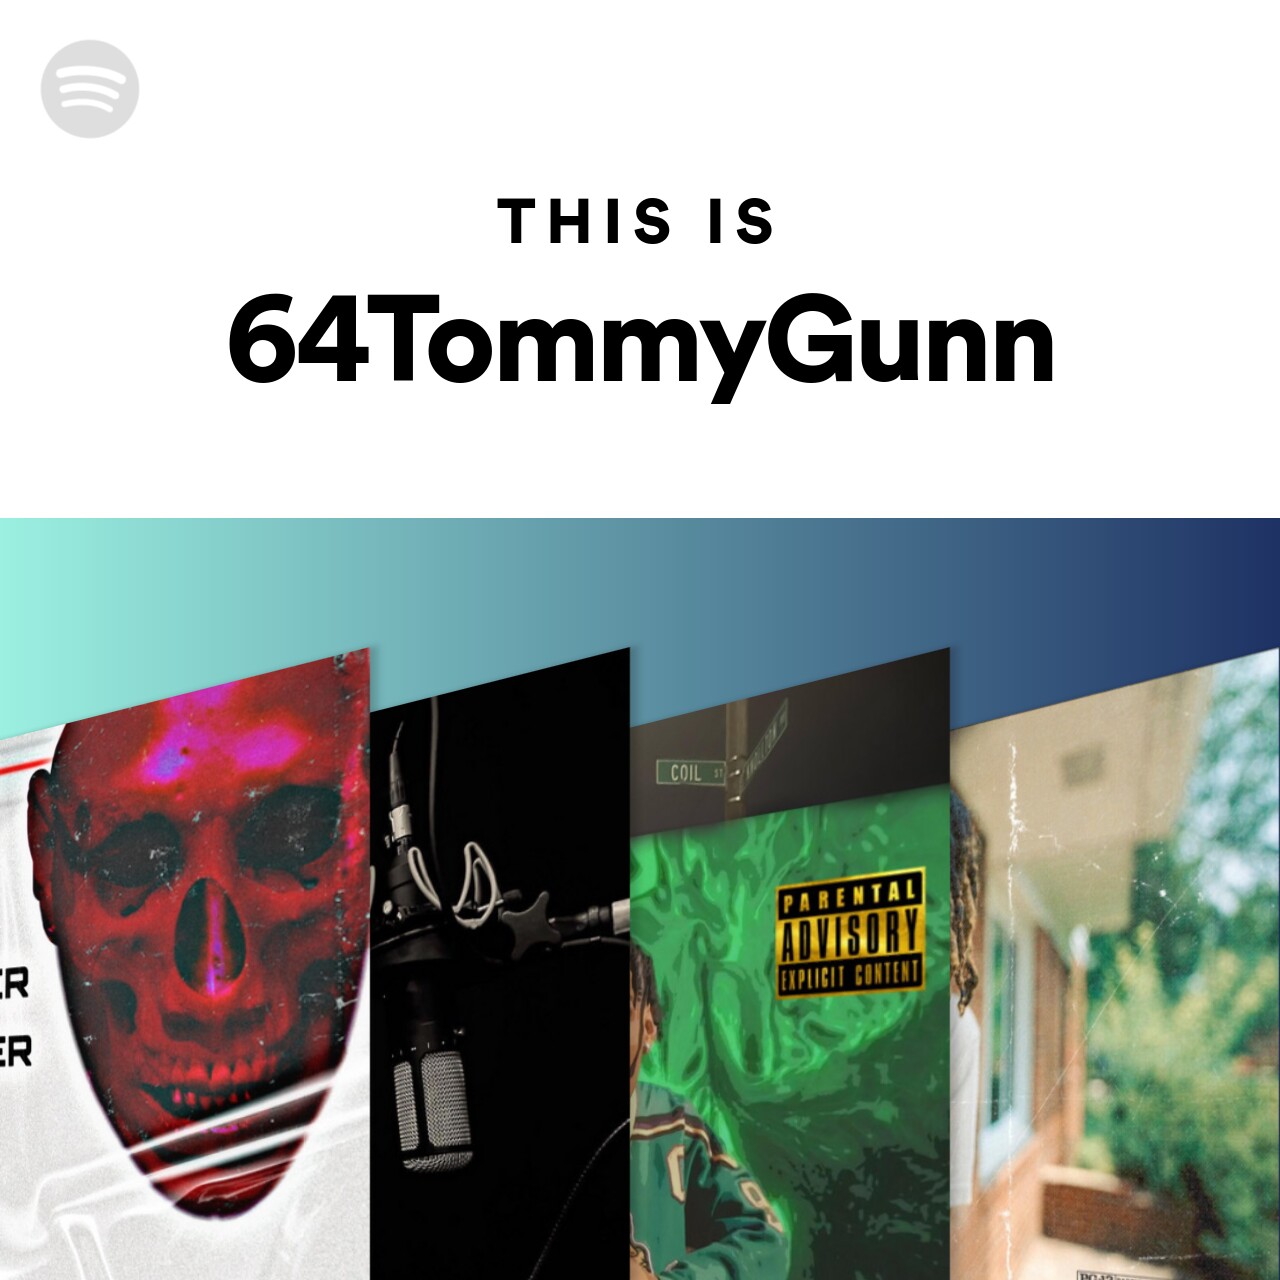 This Is 64TommyGunn